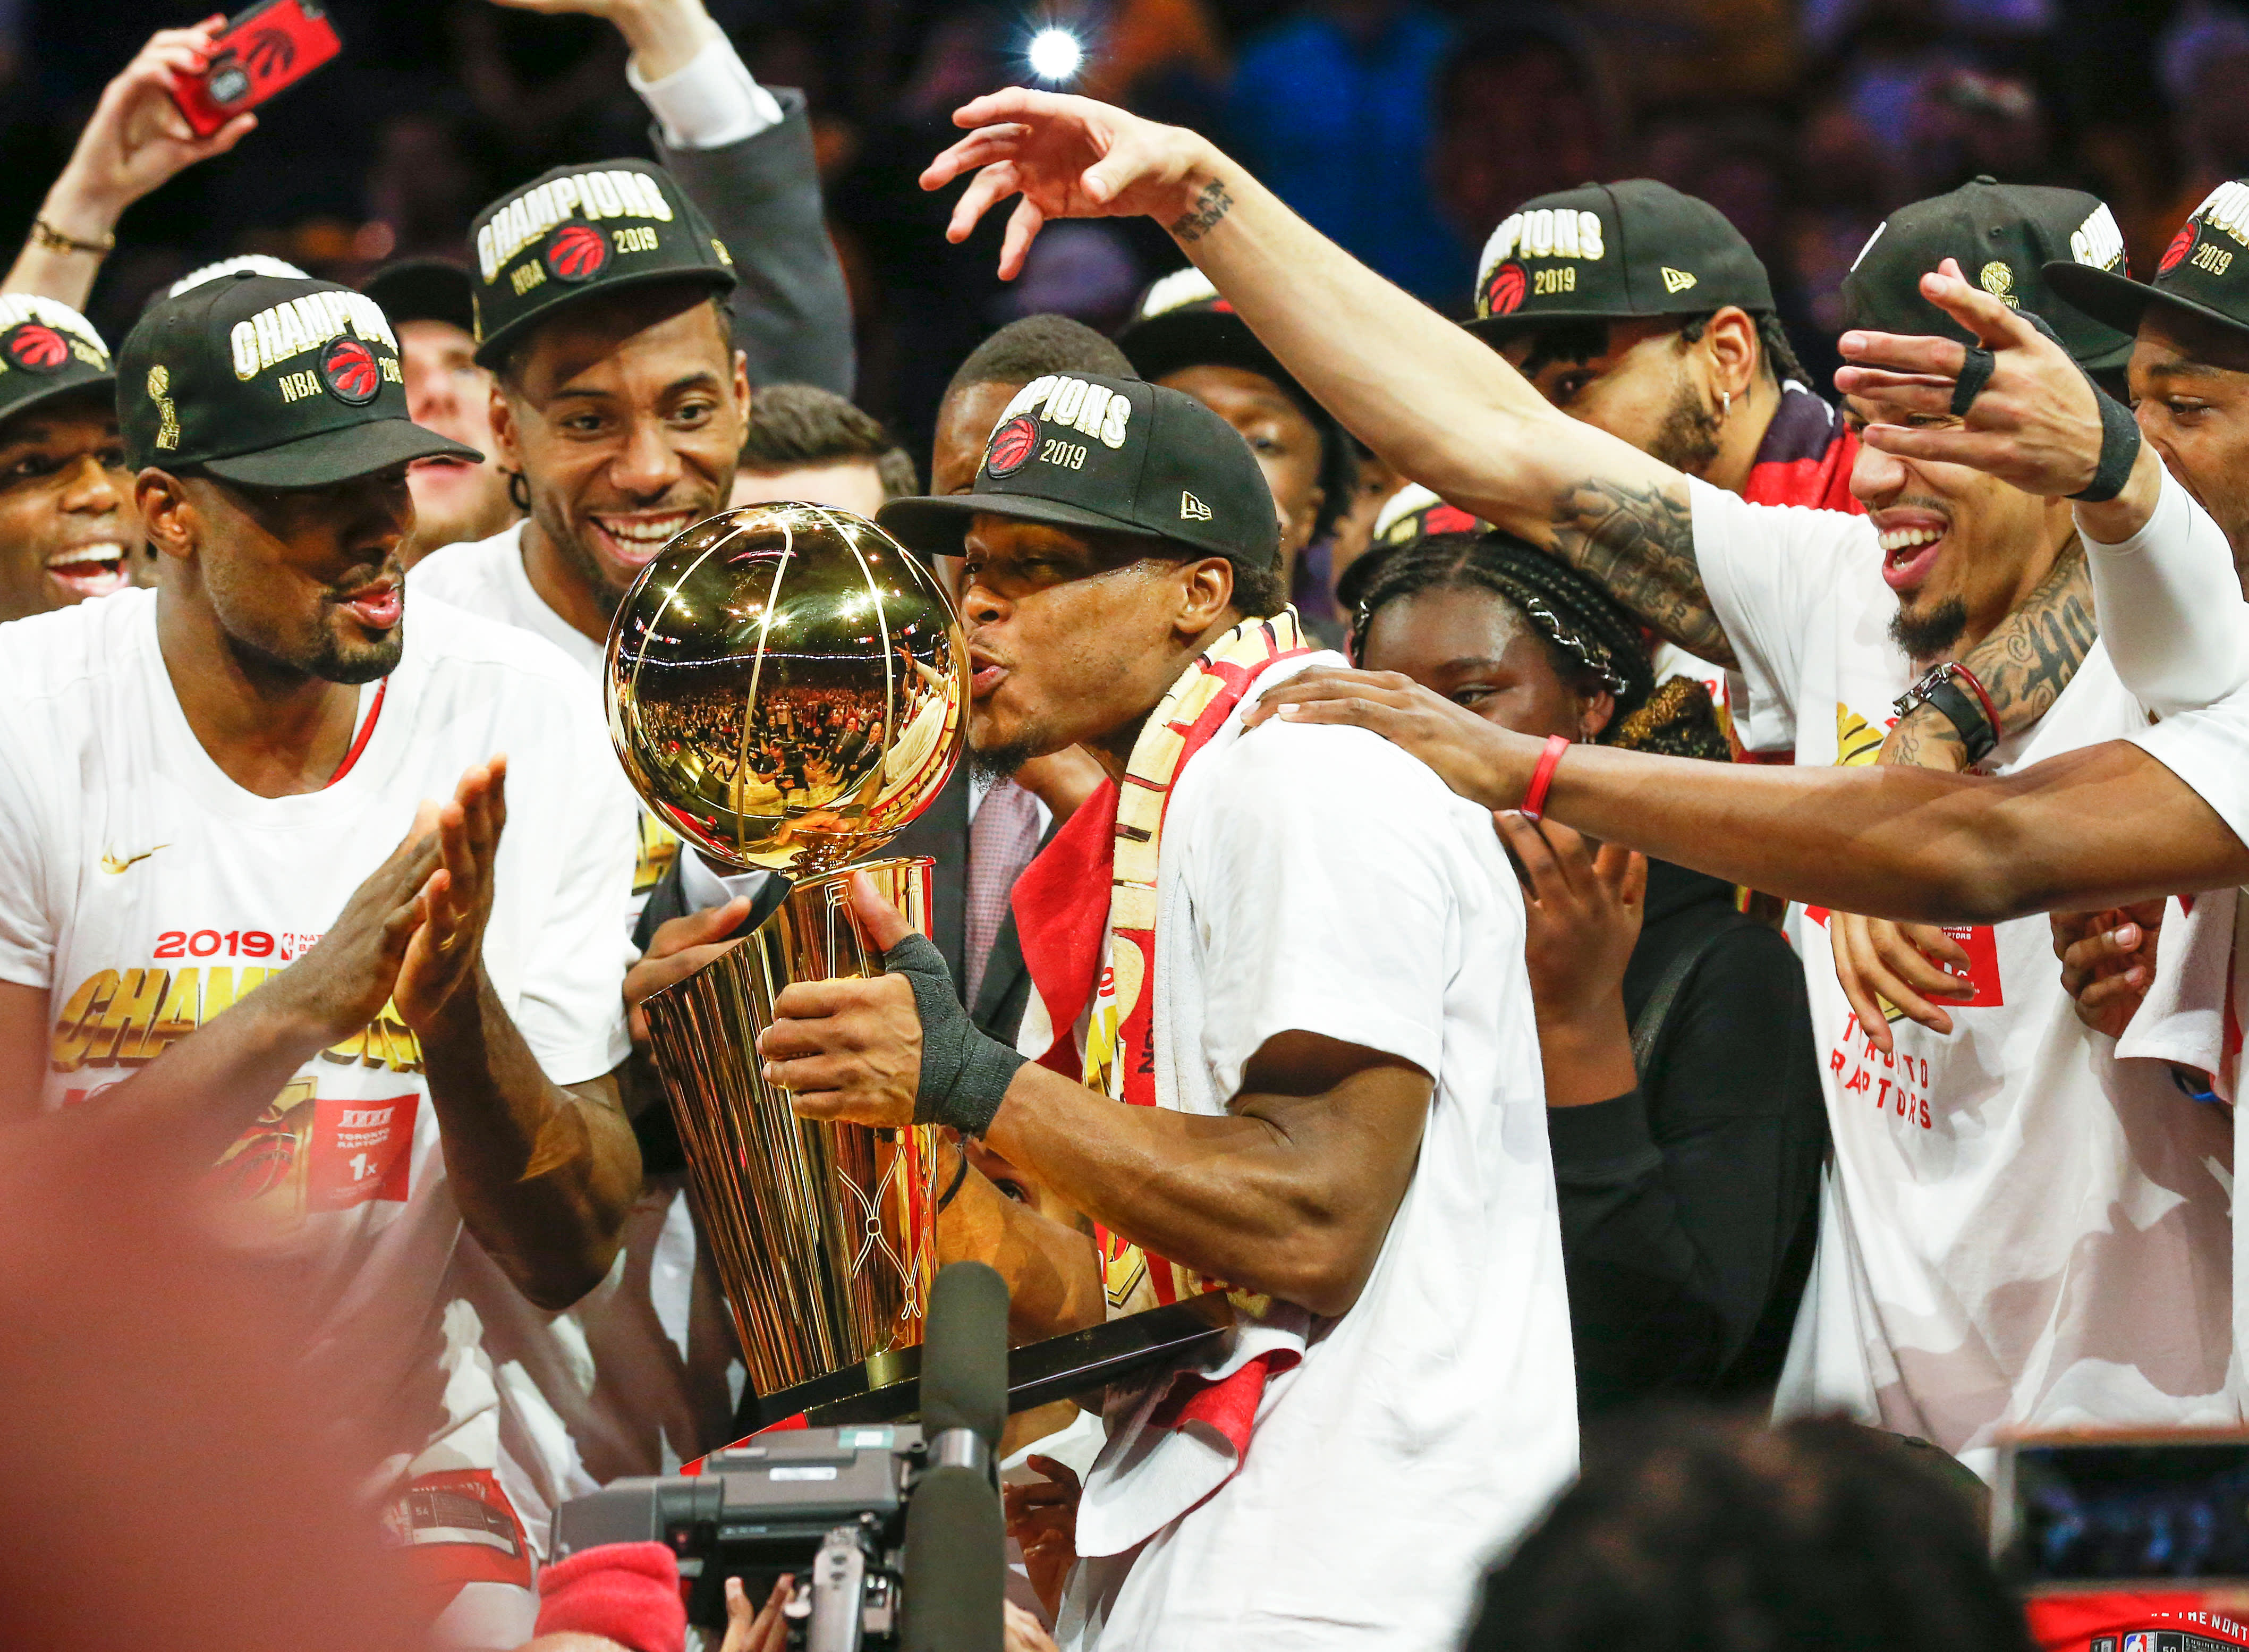 Toronto Raptors end Golden State's reign with first NBA championship